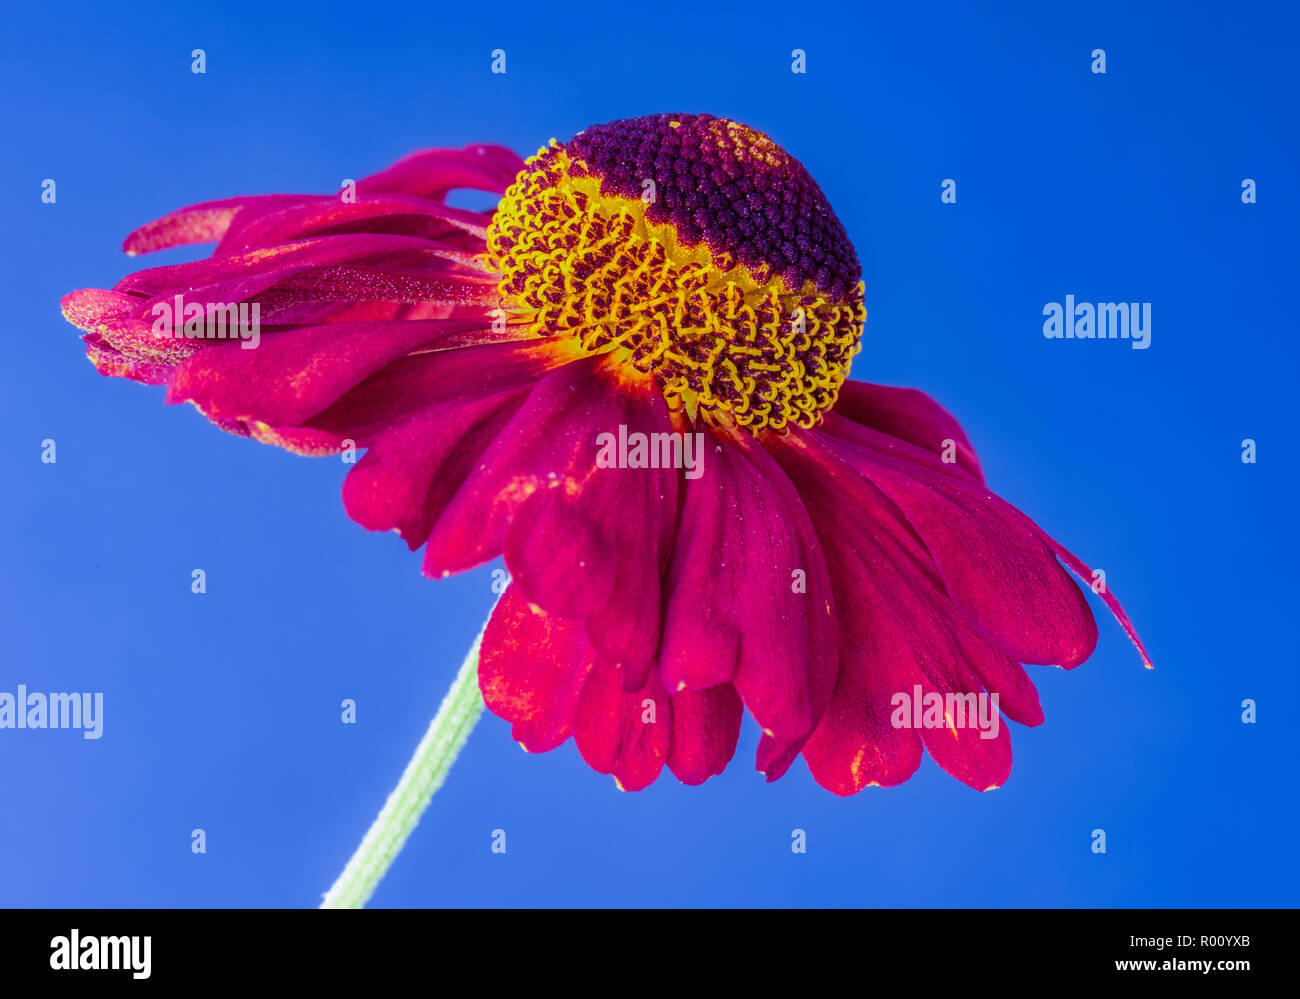 Still life fine art floral colorful macro of a single isolated wide open yellow red helenium / bride of the sun blossom in fantastic realism / surreal Stock Photo